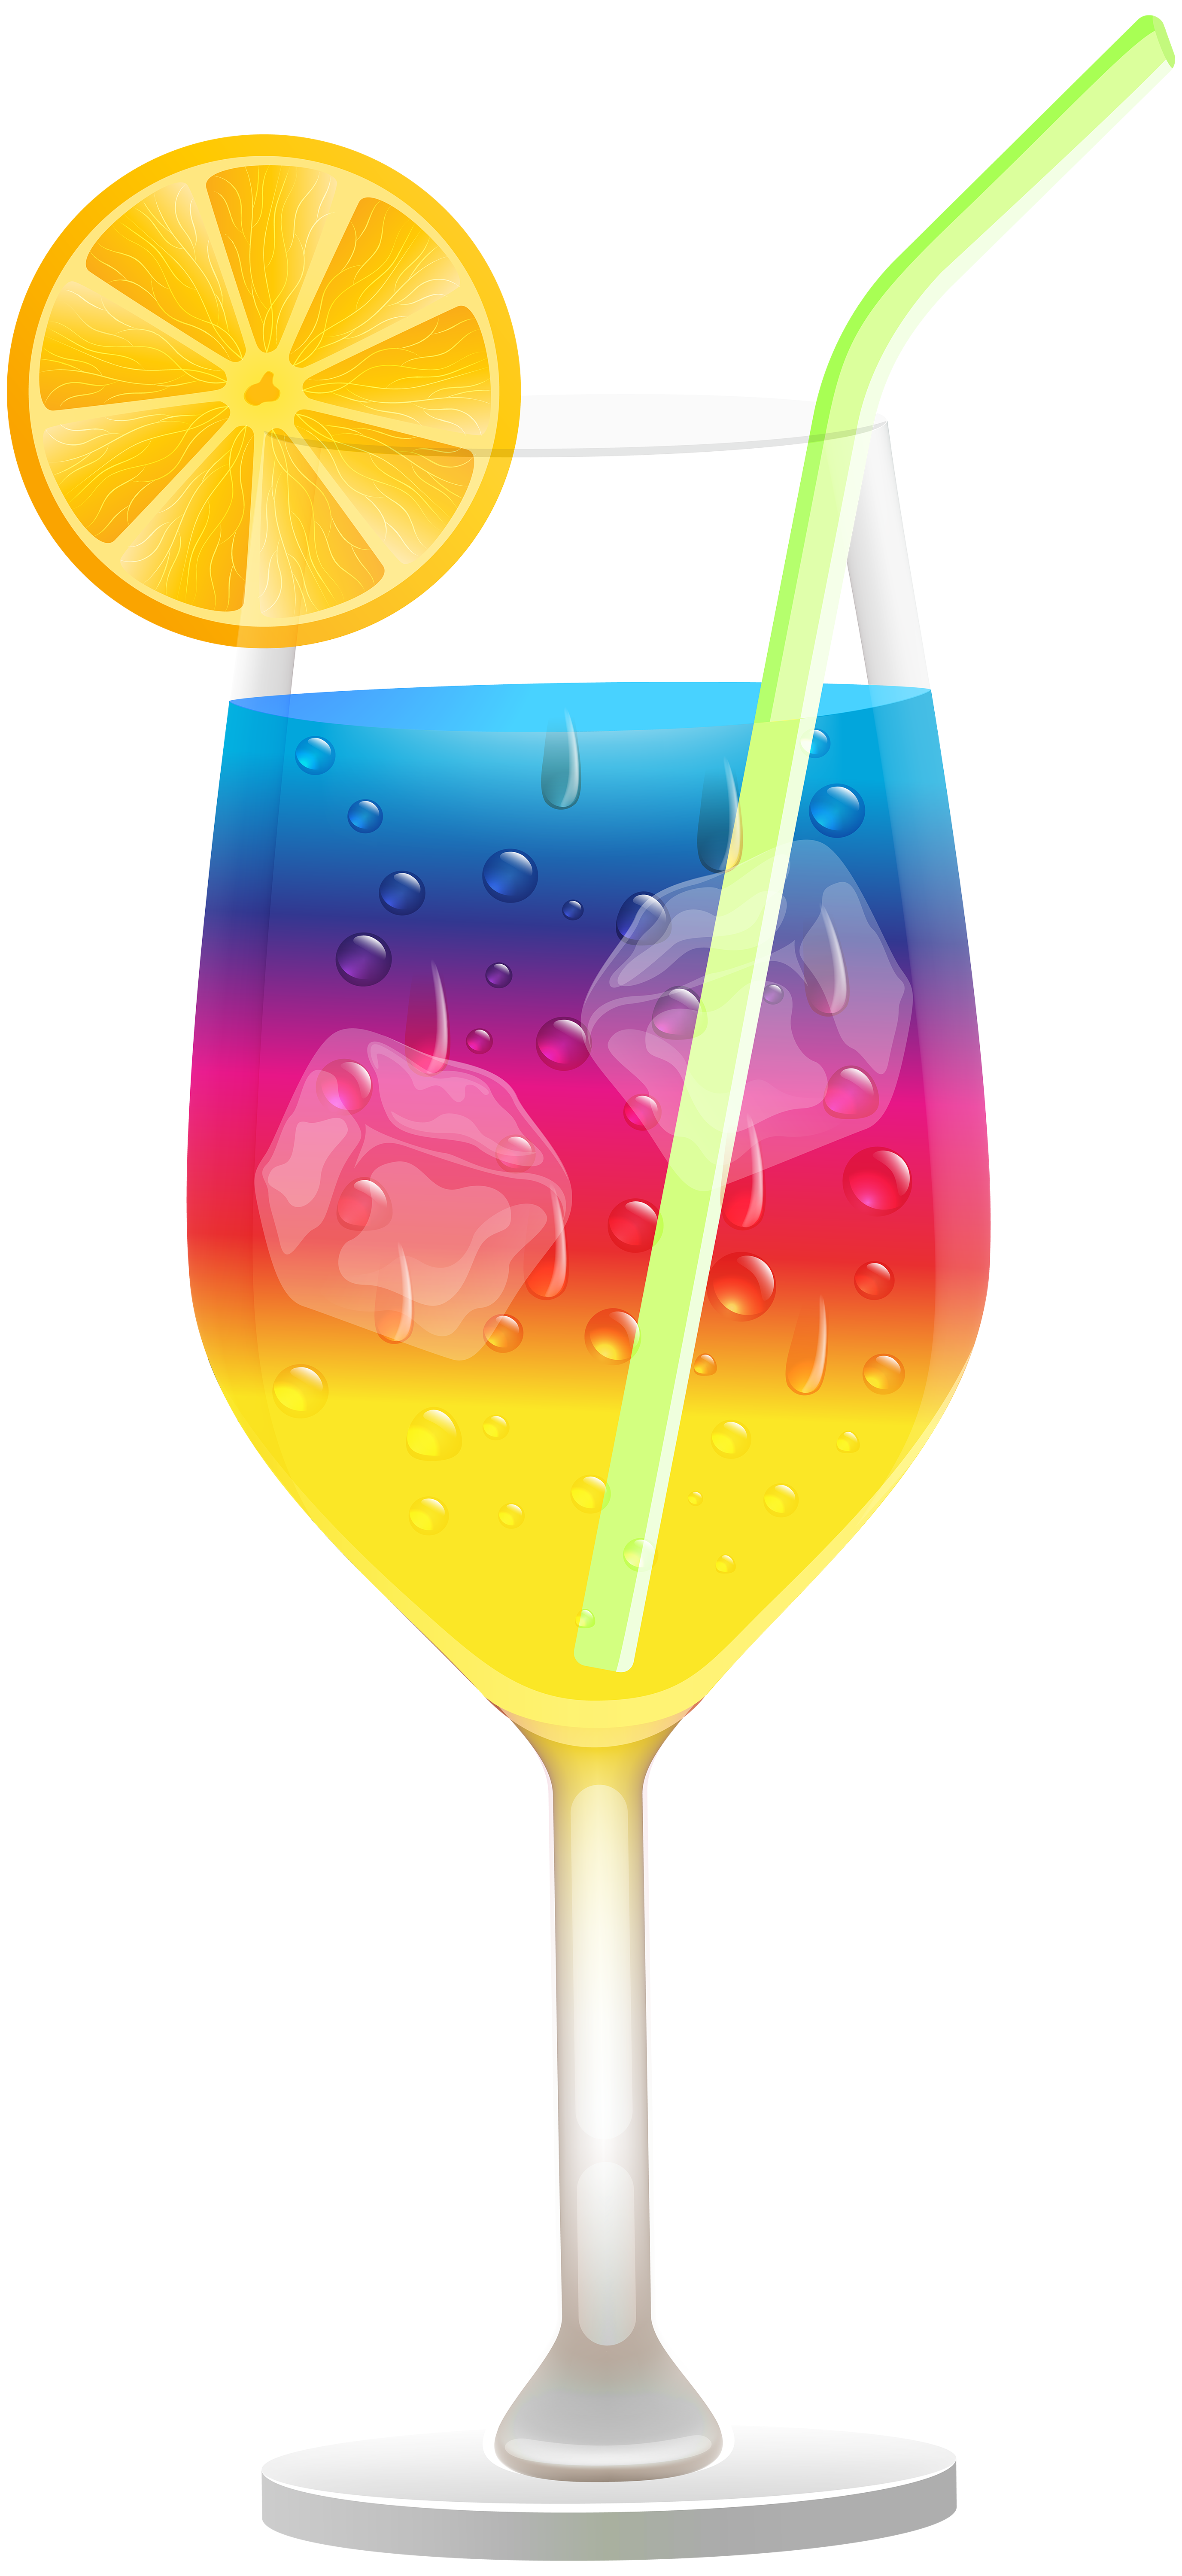 cocktail clipart punch drink